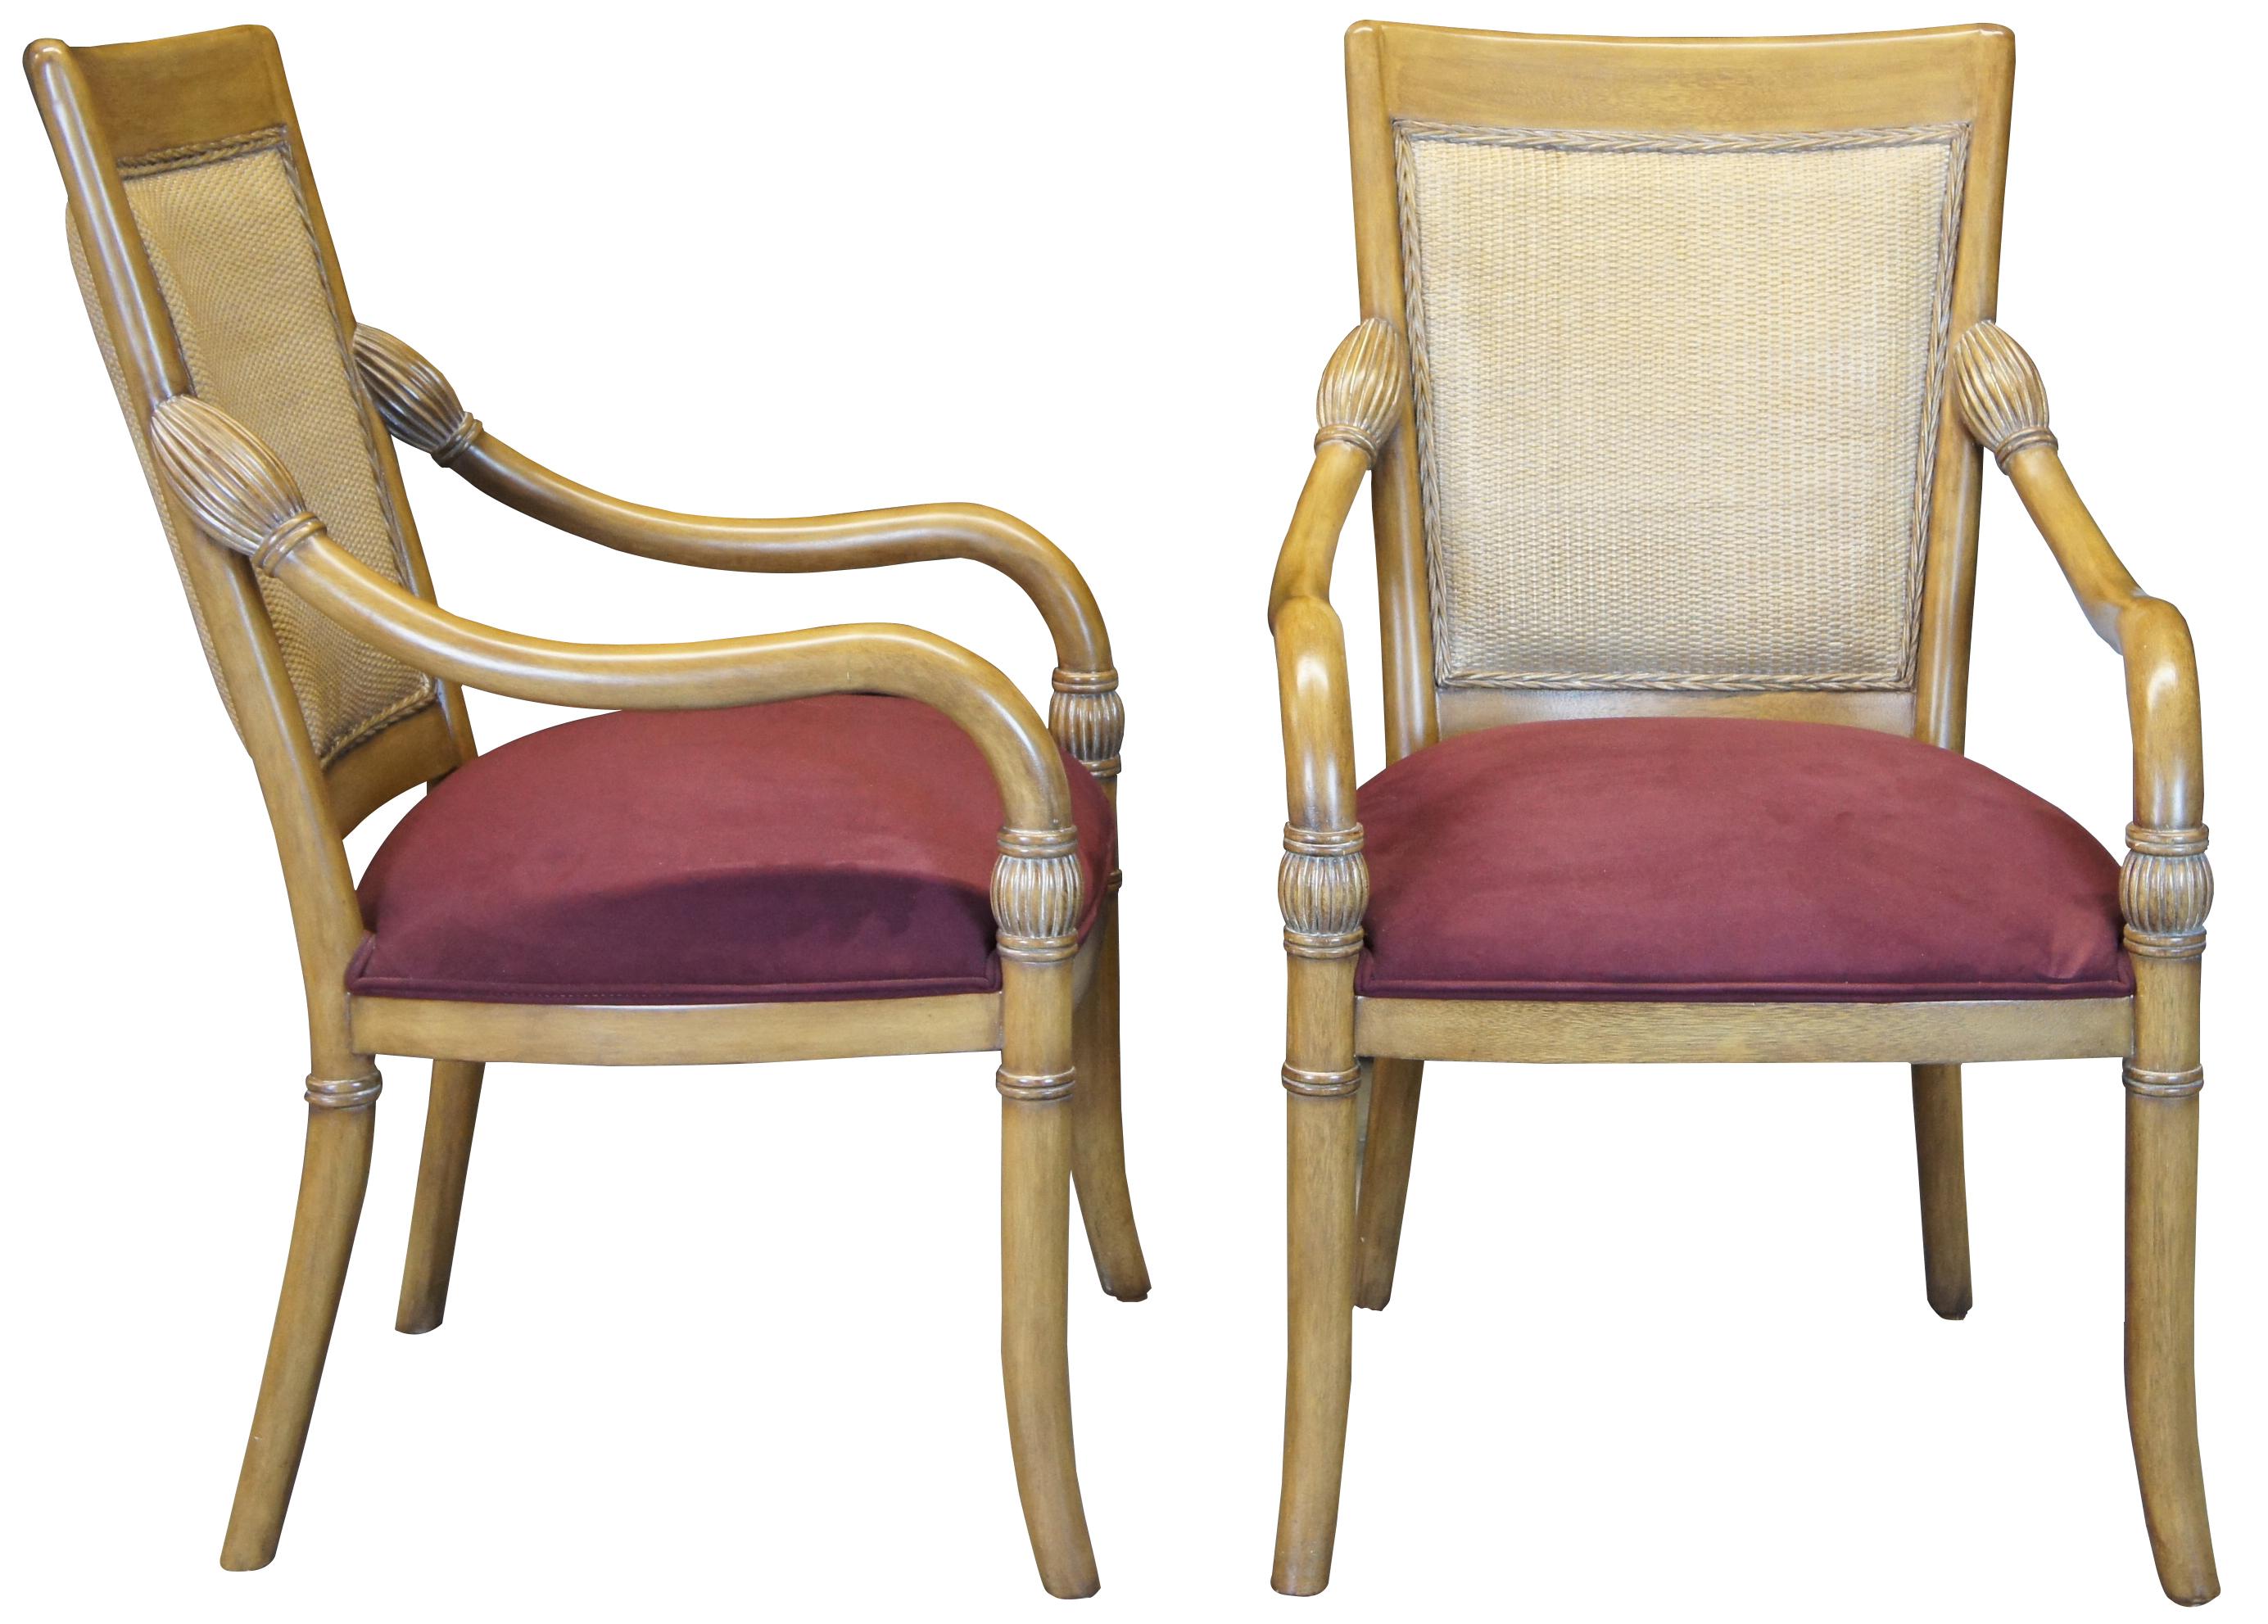 A beautiful pair of Kreiss Luxury Empire style arm chairs. Made from mahogany with a wicker inset backing and swooping arms with bulbous fluted turnings. Upholstered in maroon ultrasuede.
 